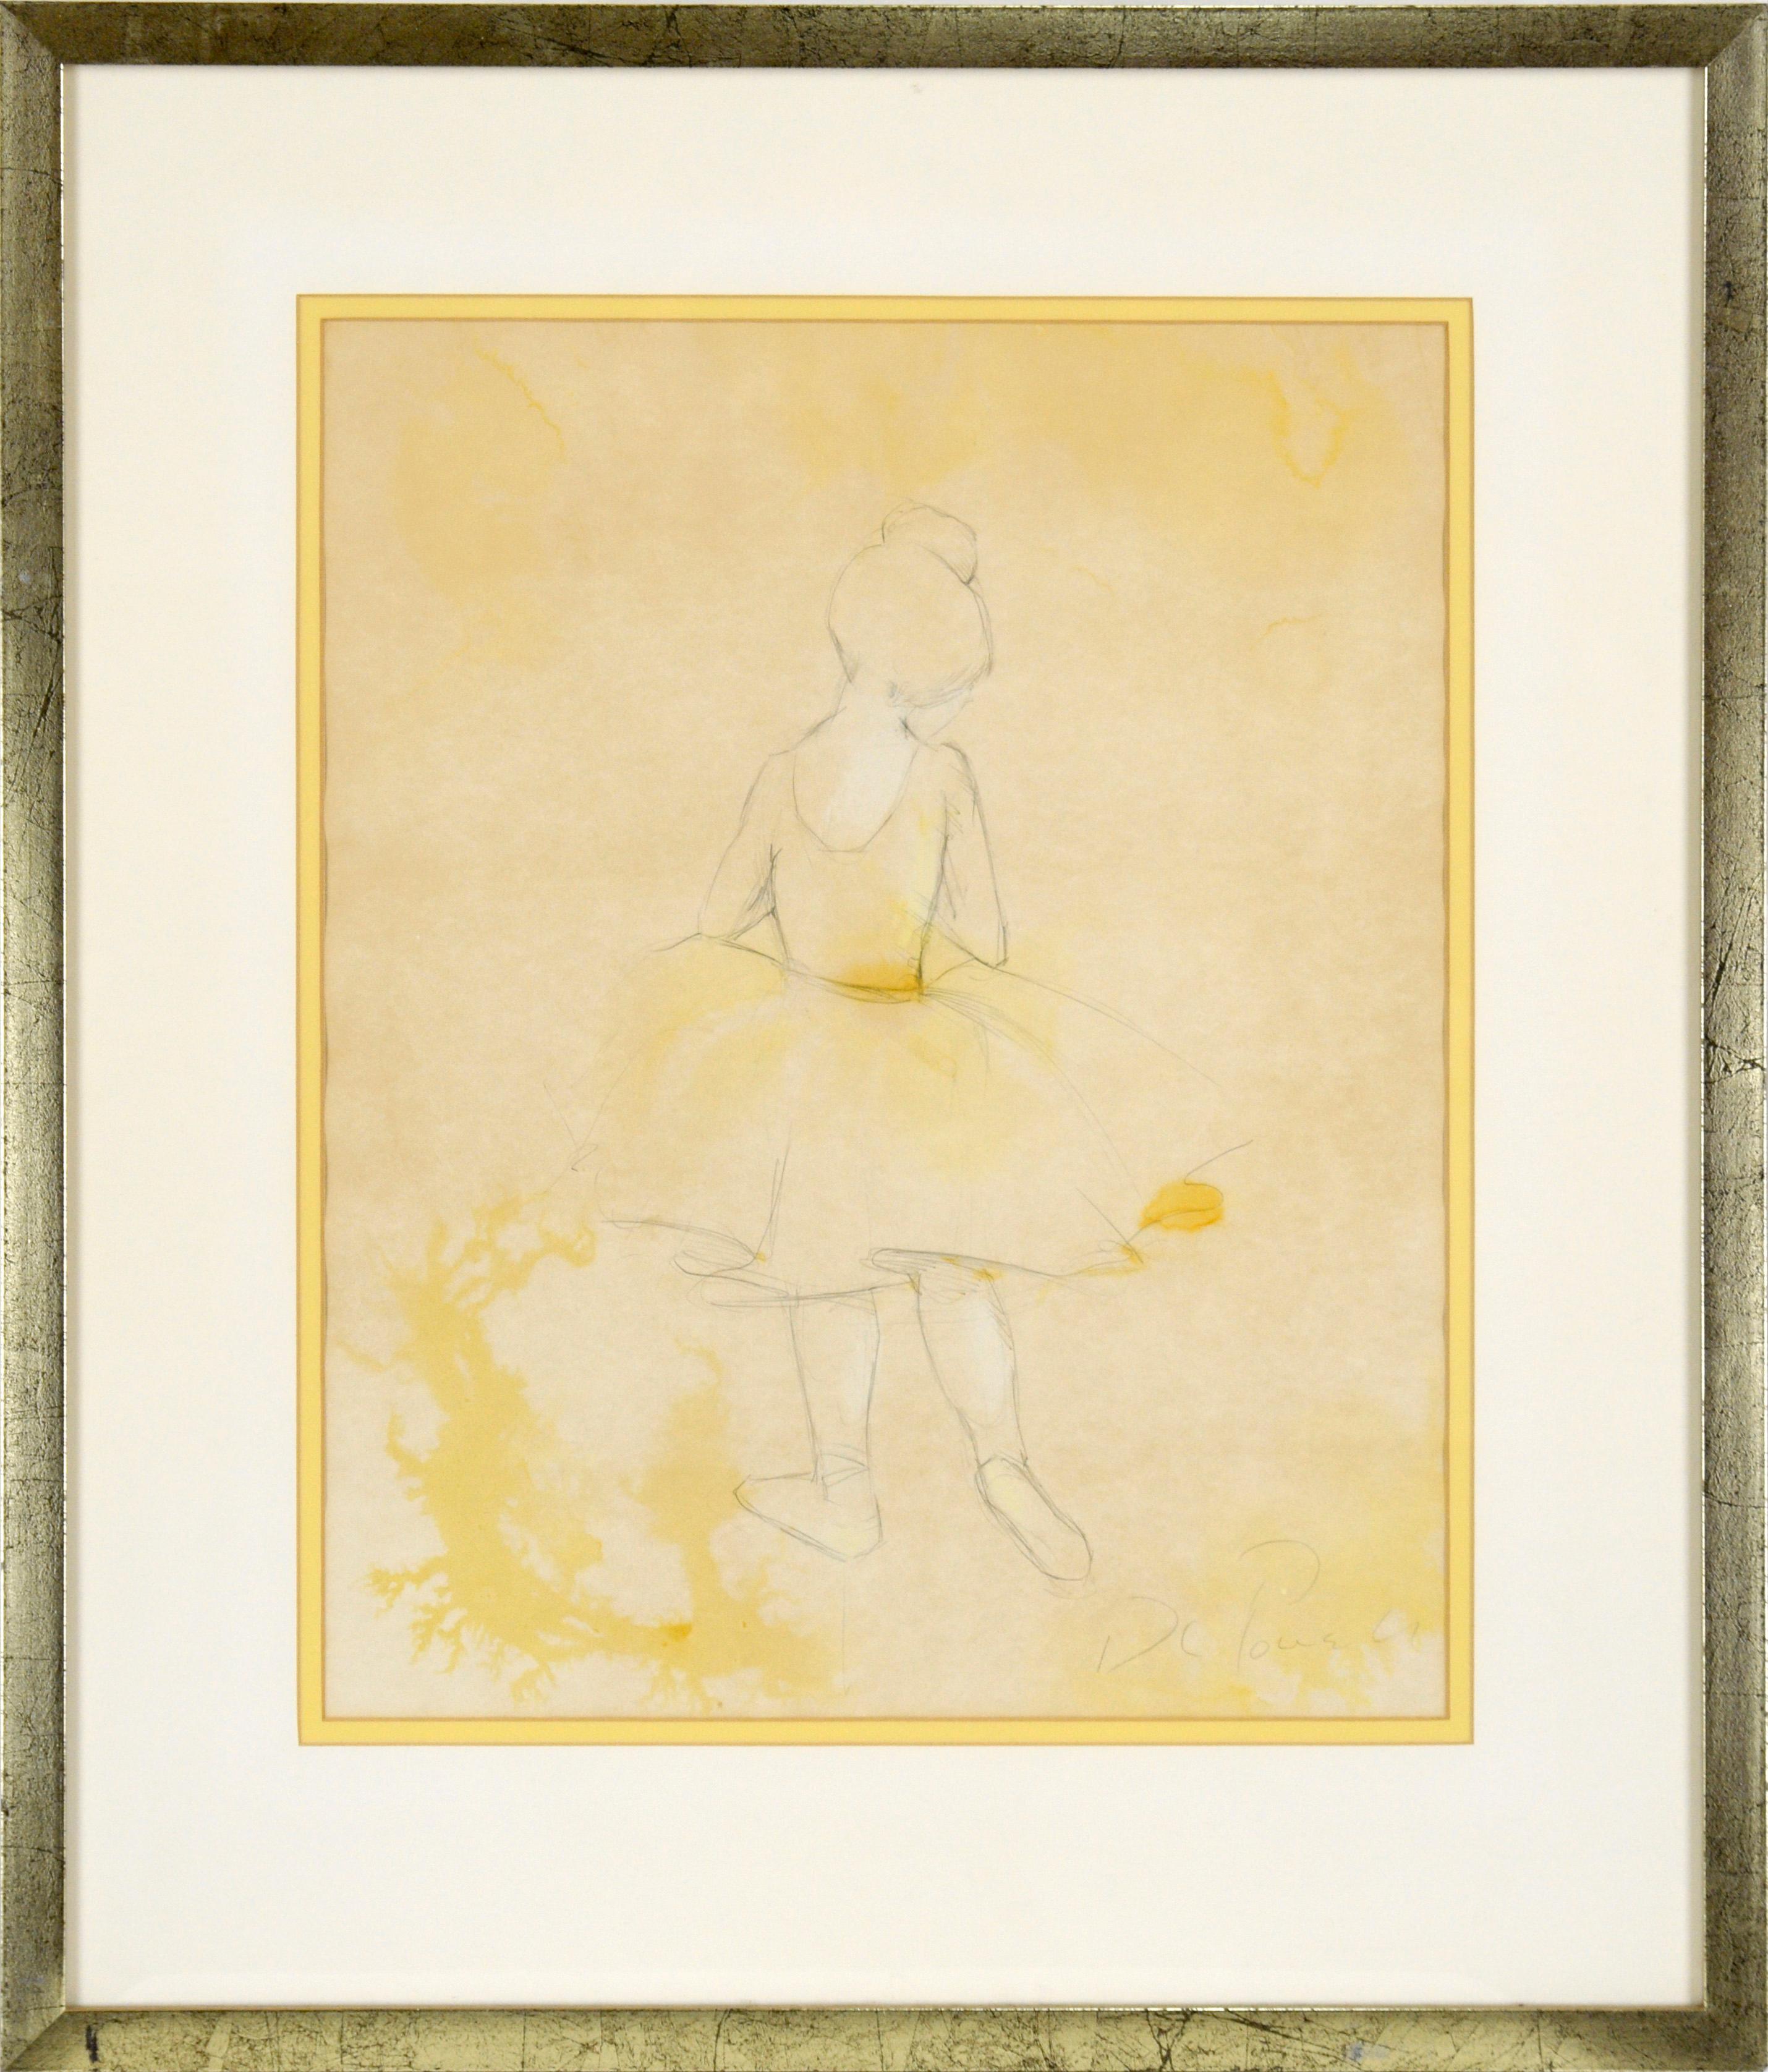 Unknown Figurative Art - The Little Ballerina - Figurative Drawing in Pencil on Paper